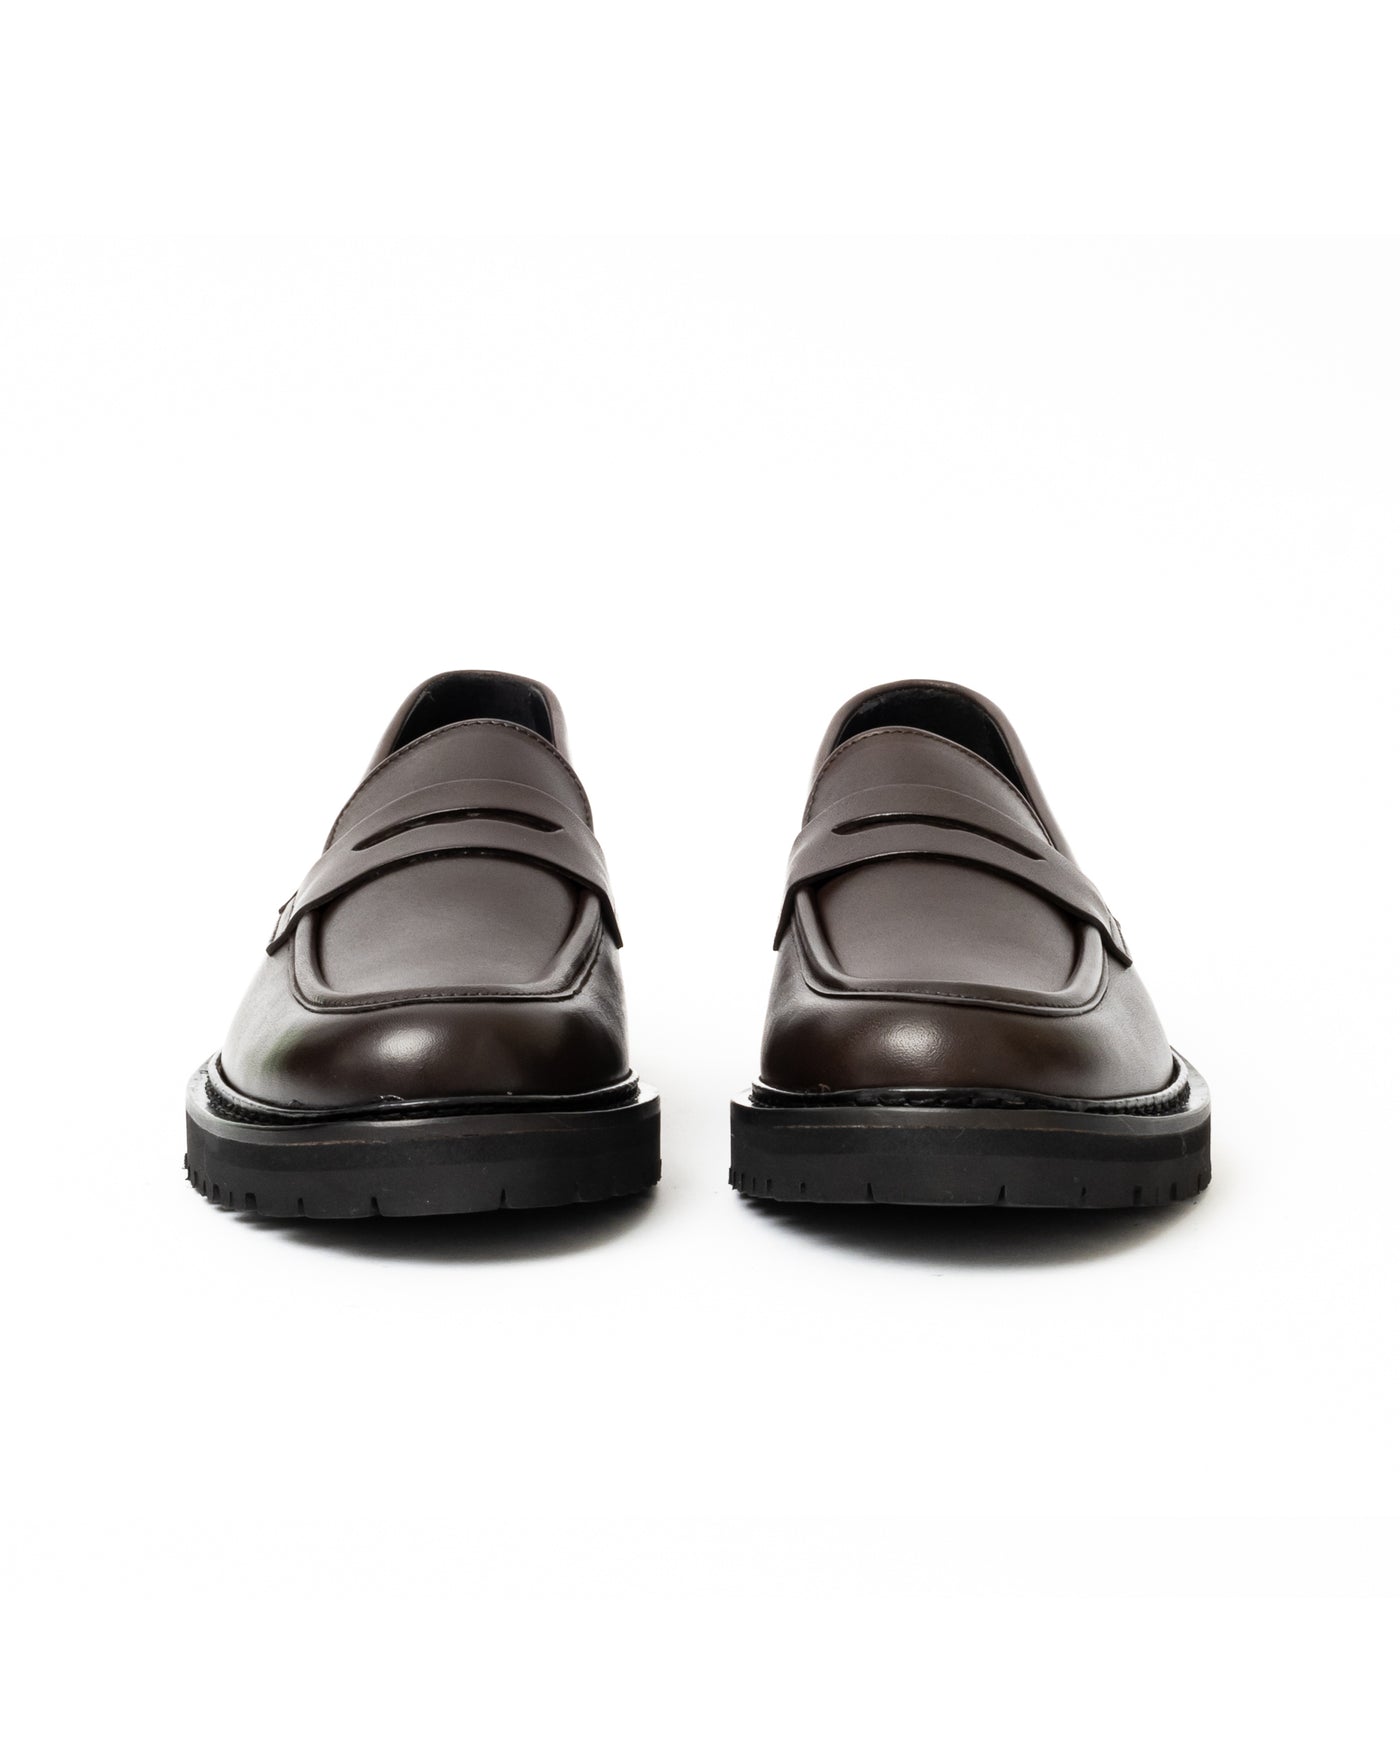 Vinny's Richee Penny Loafer Dark Brown Crust Leather